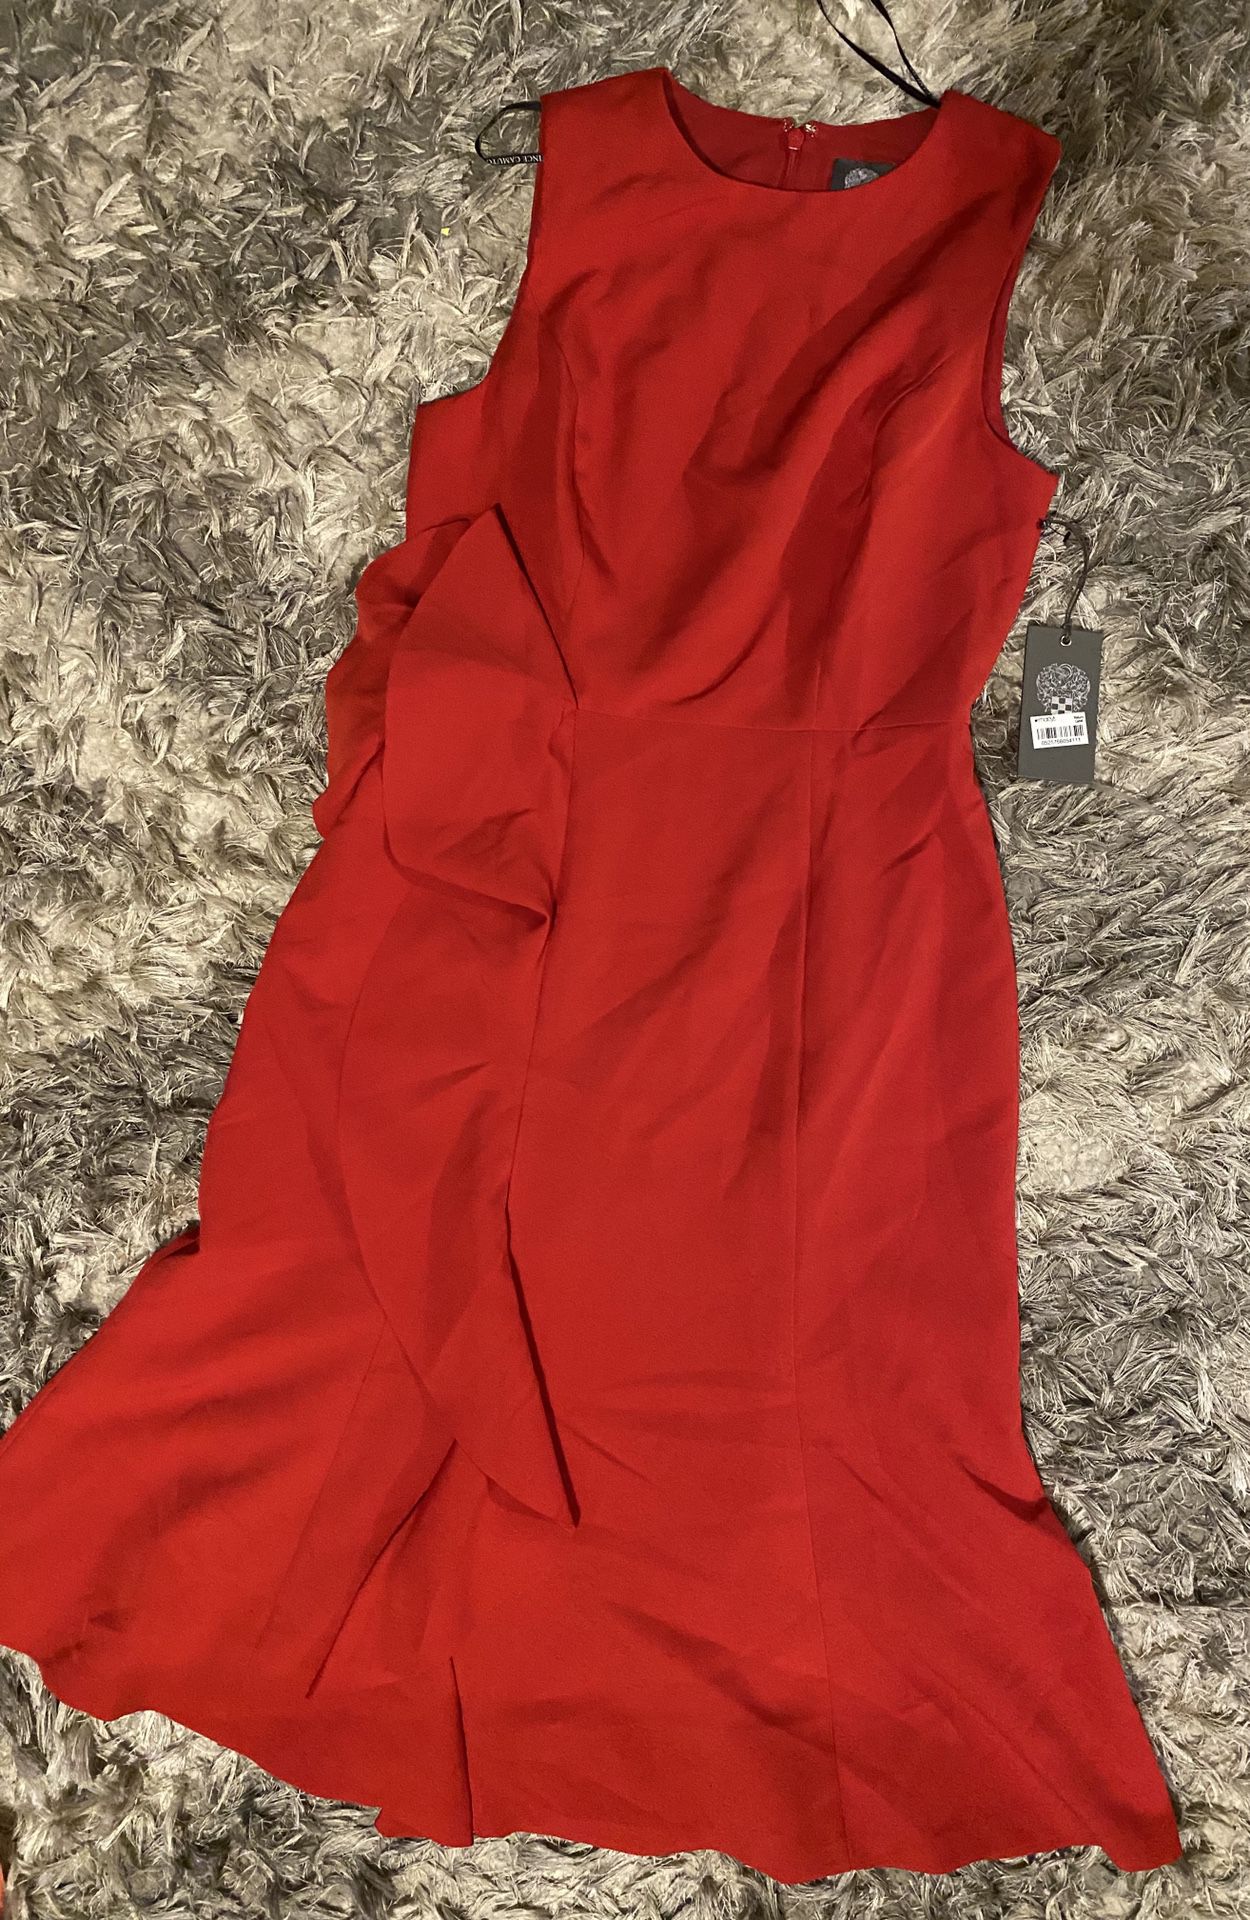 Vince Camuto women red dress